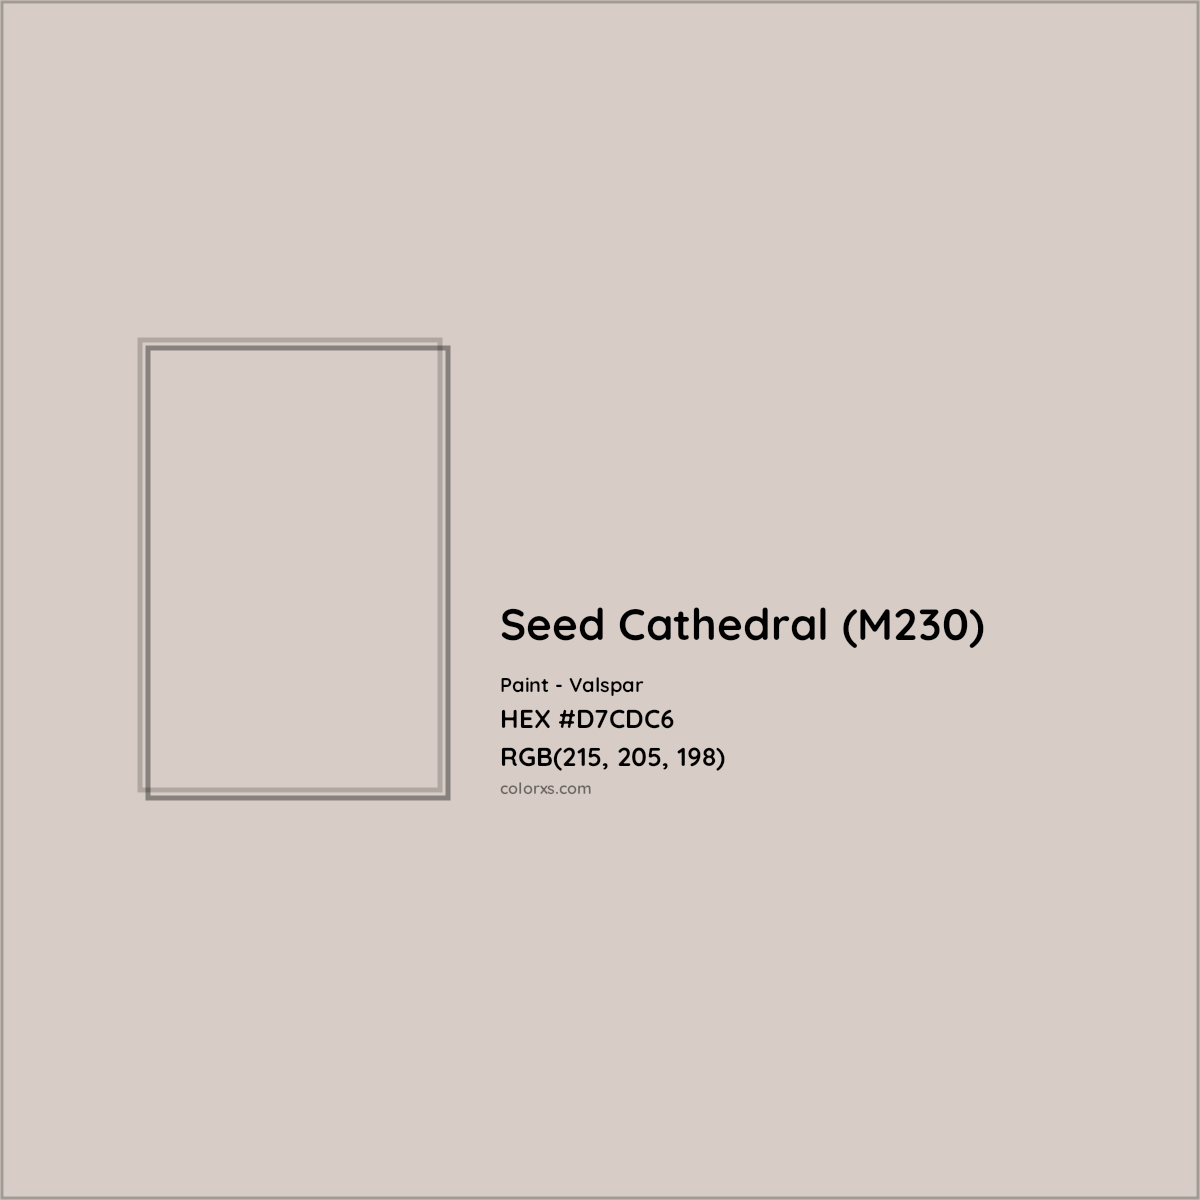 HEX #D7CDC6 Seed Cathedral (M230) Paint Valspar - Color Code